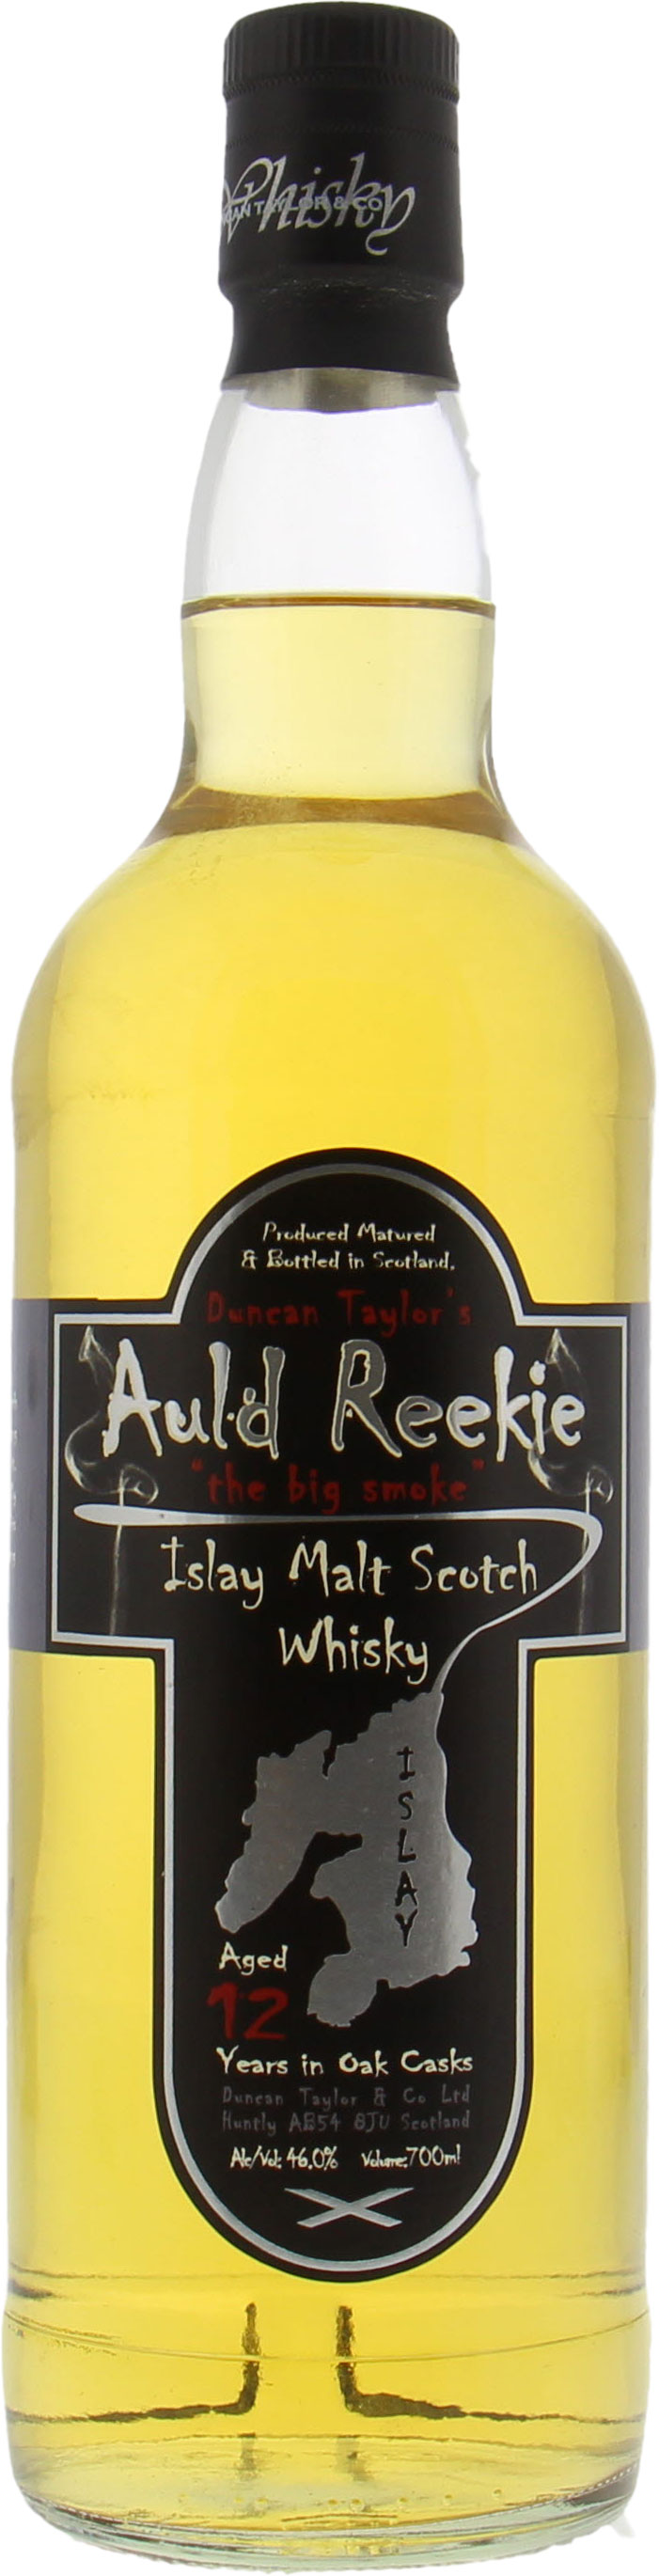 Duncan Taylor - Auld Reekie 12 Years Old The Big Smoke 46% NV No Original Container